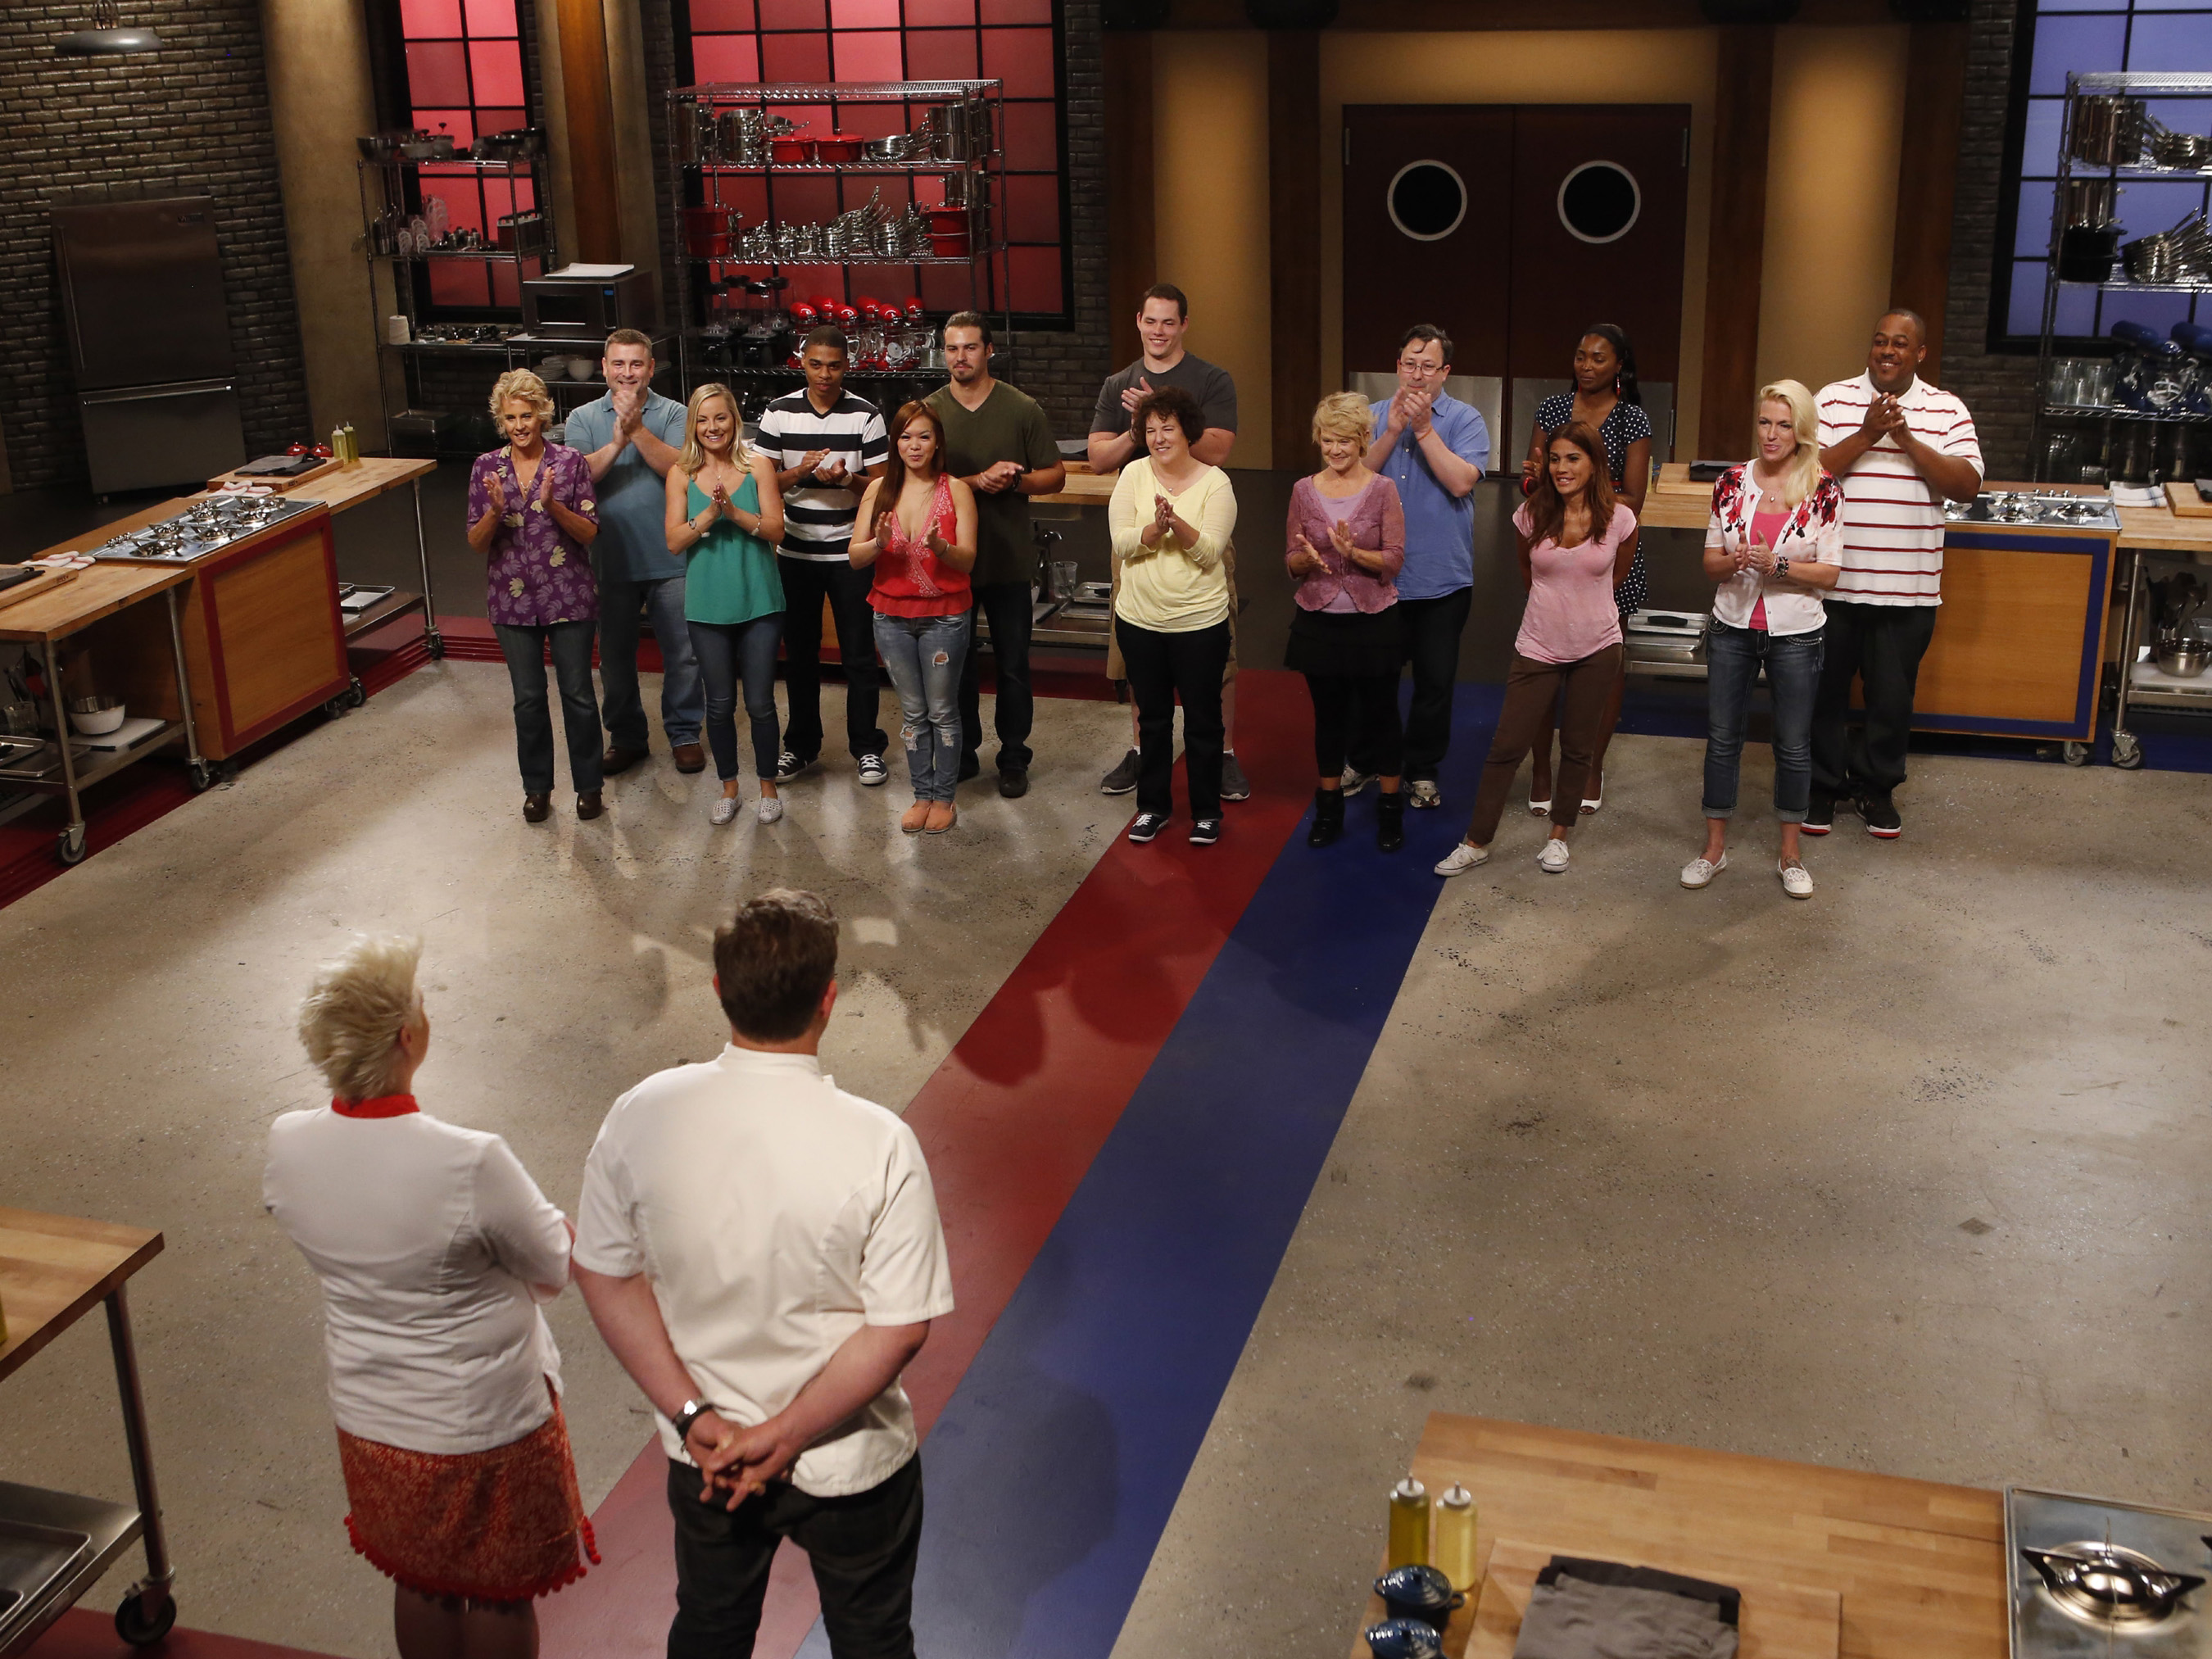 Recruits are welcomed by hosts Tyler Florence and Anne Burrell on Food Network's Worst Cooks in America